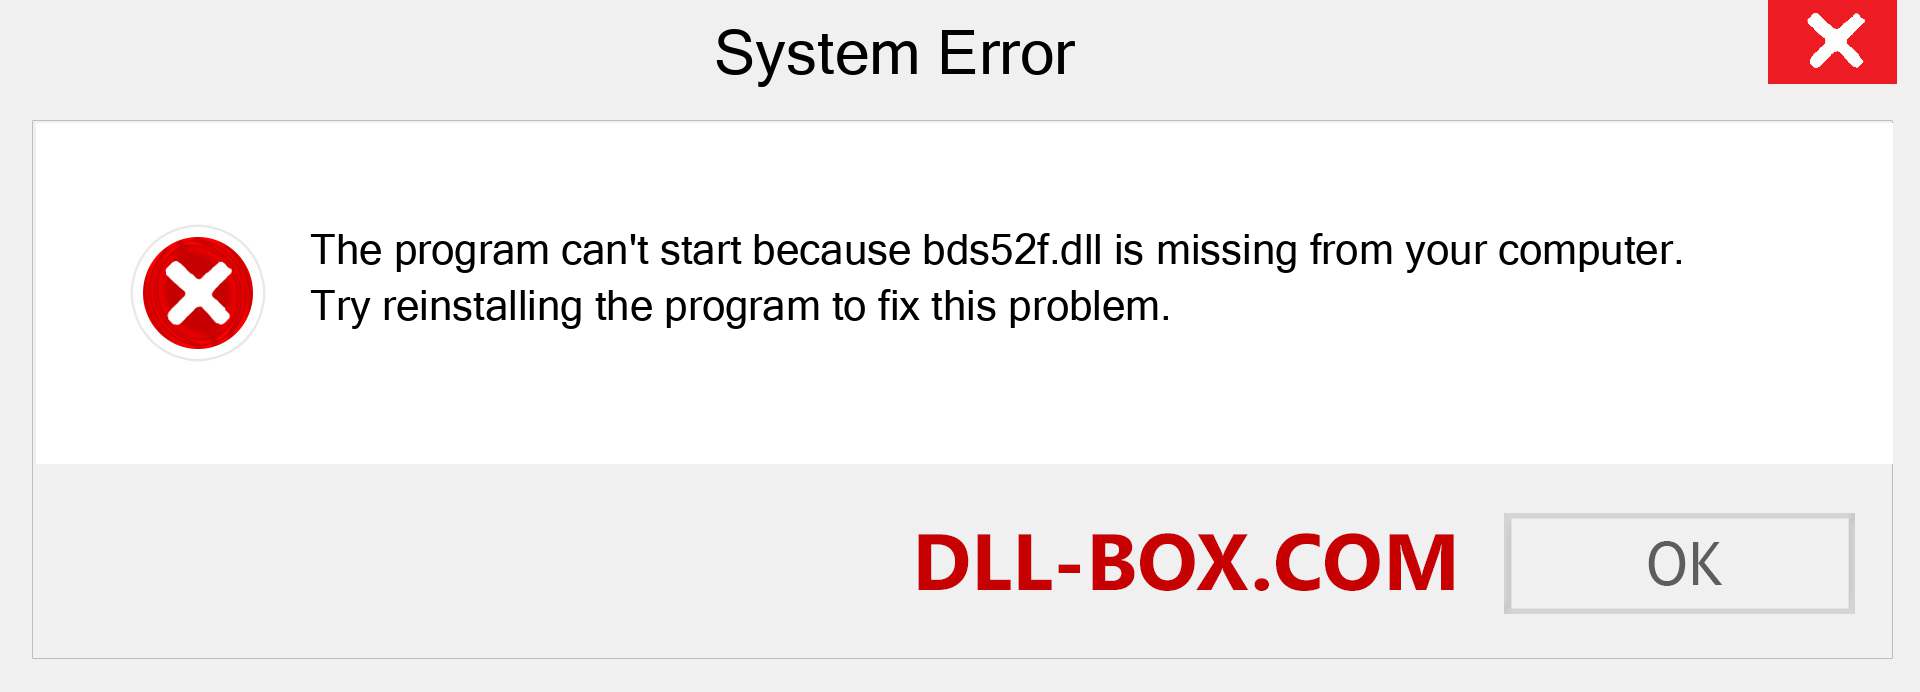  bds52f.dll file is missing?. Download for Windows 7, 8, 10 - Fix  bds52f dll Missing Error on Windows, photos, images